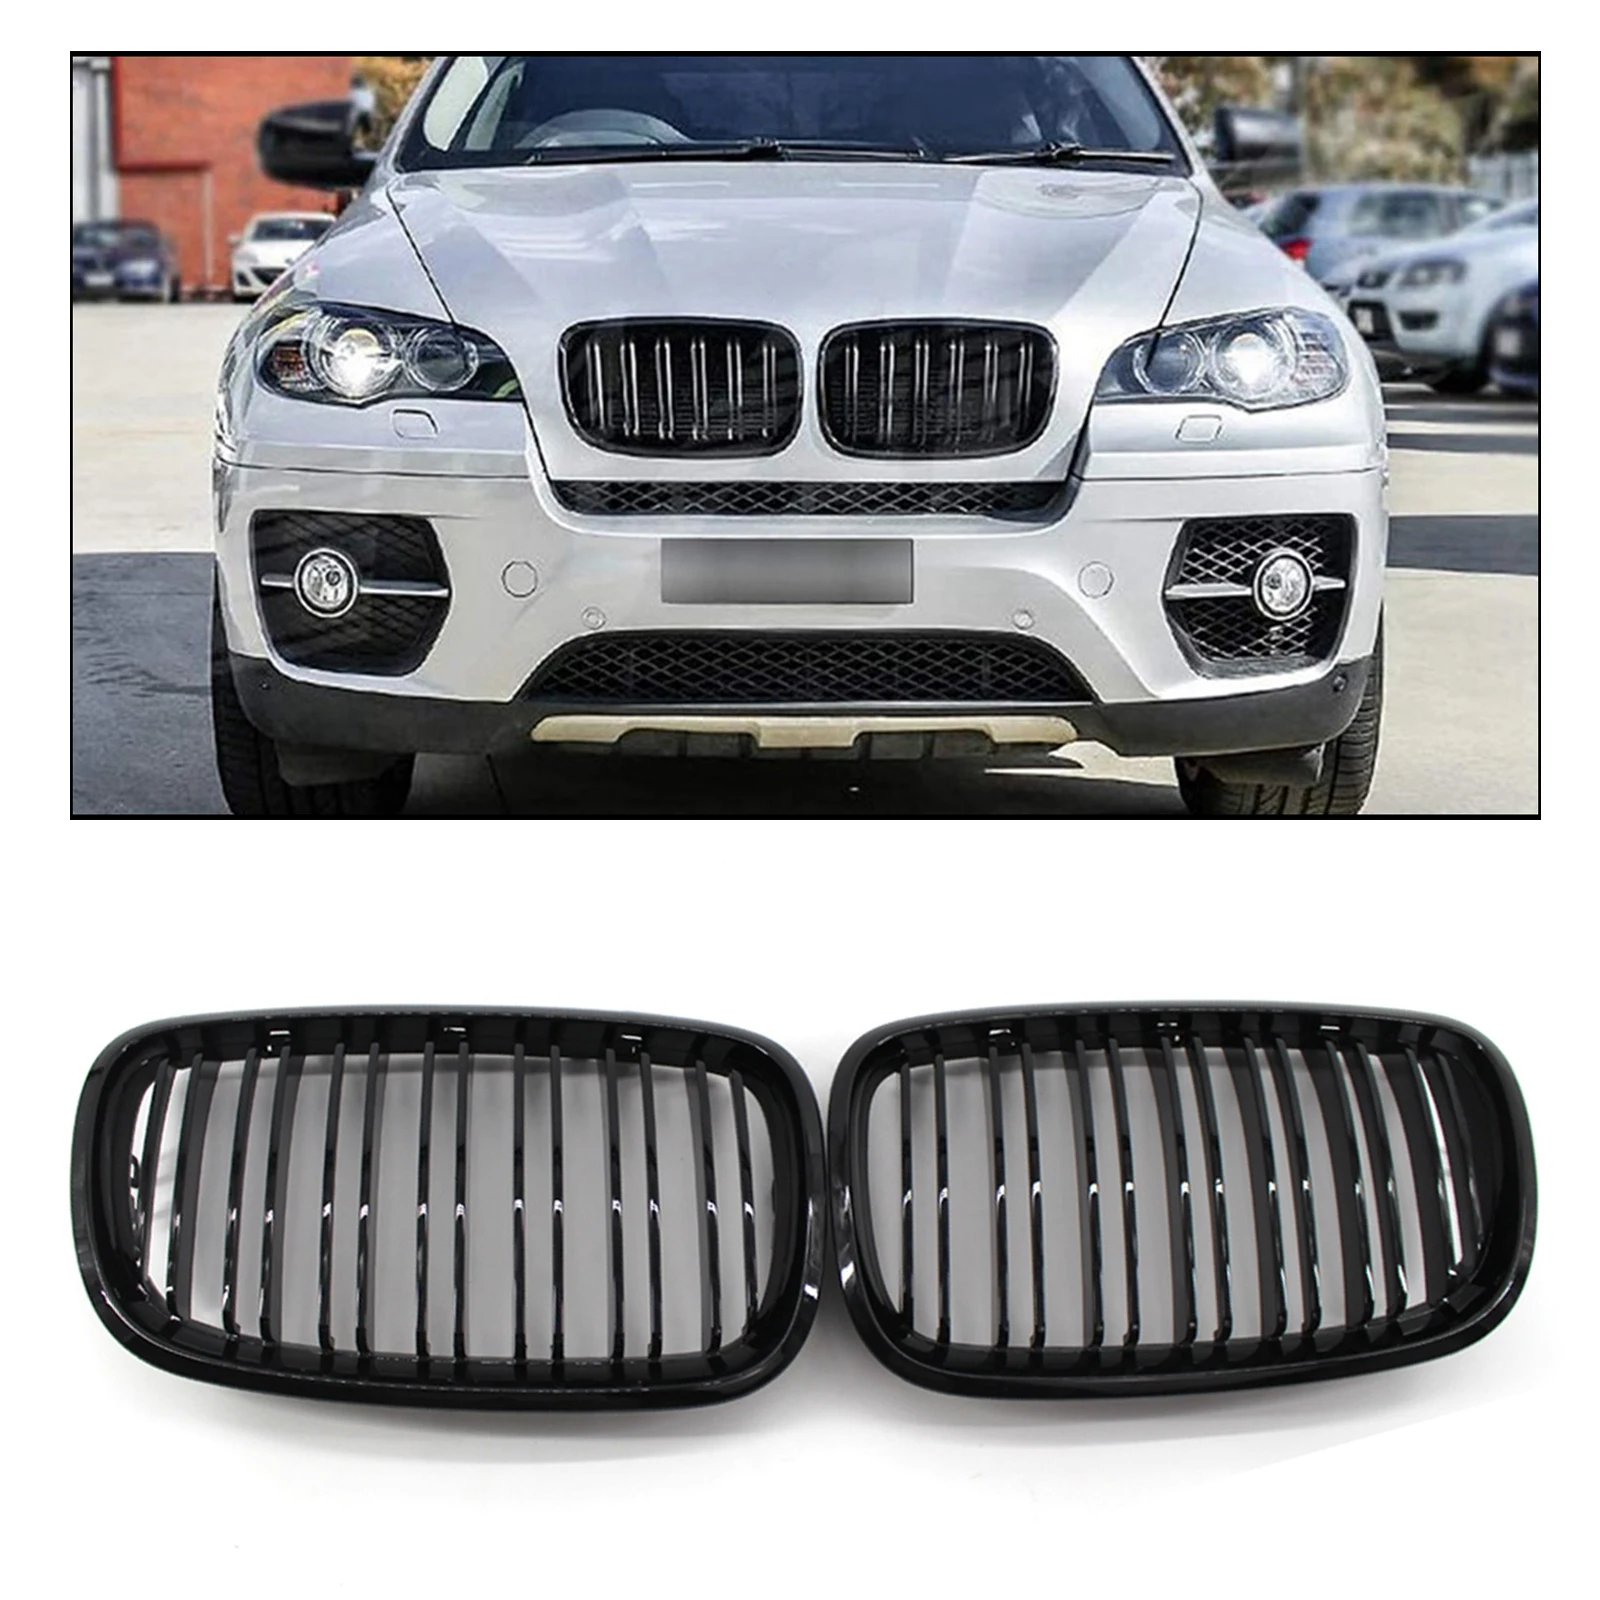 Front Bumper Intake Kidney Grills Grille for BMW X5 E70 X6 E71 X6M 2Pc Set